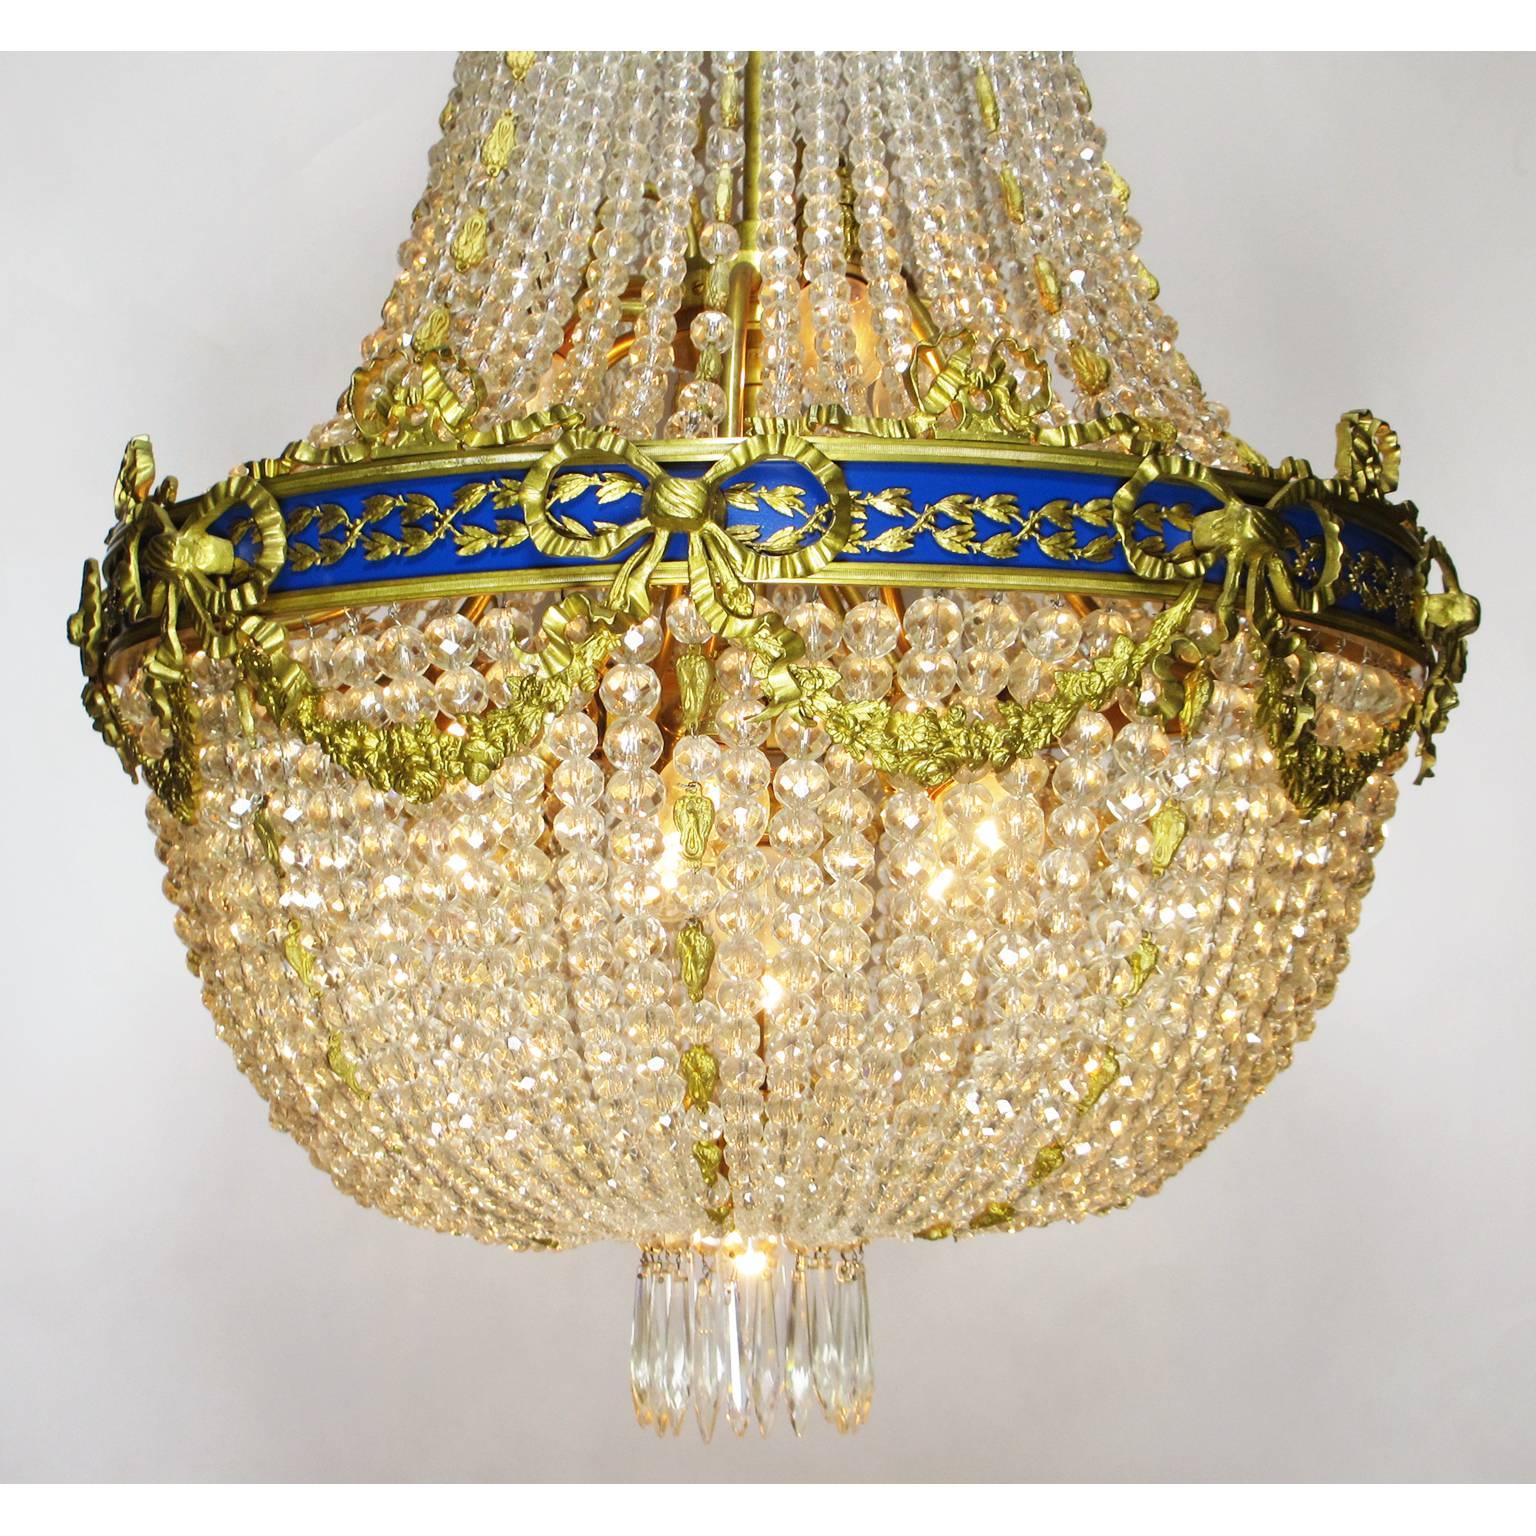 Carved Fine French Empire Style 19th-20th Century Gilt Bronze and Cut-Glass Chandelier